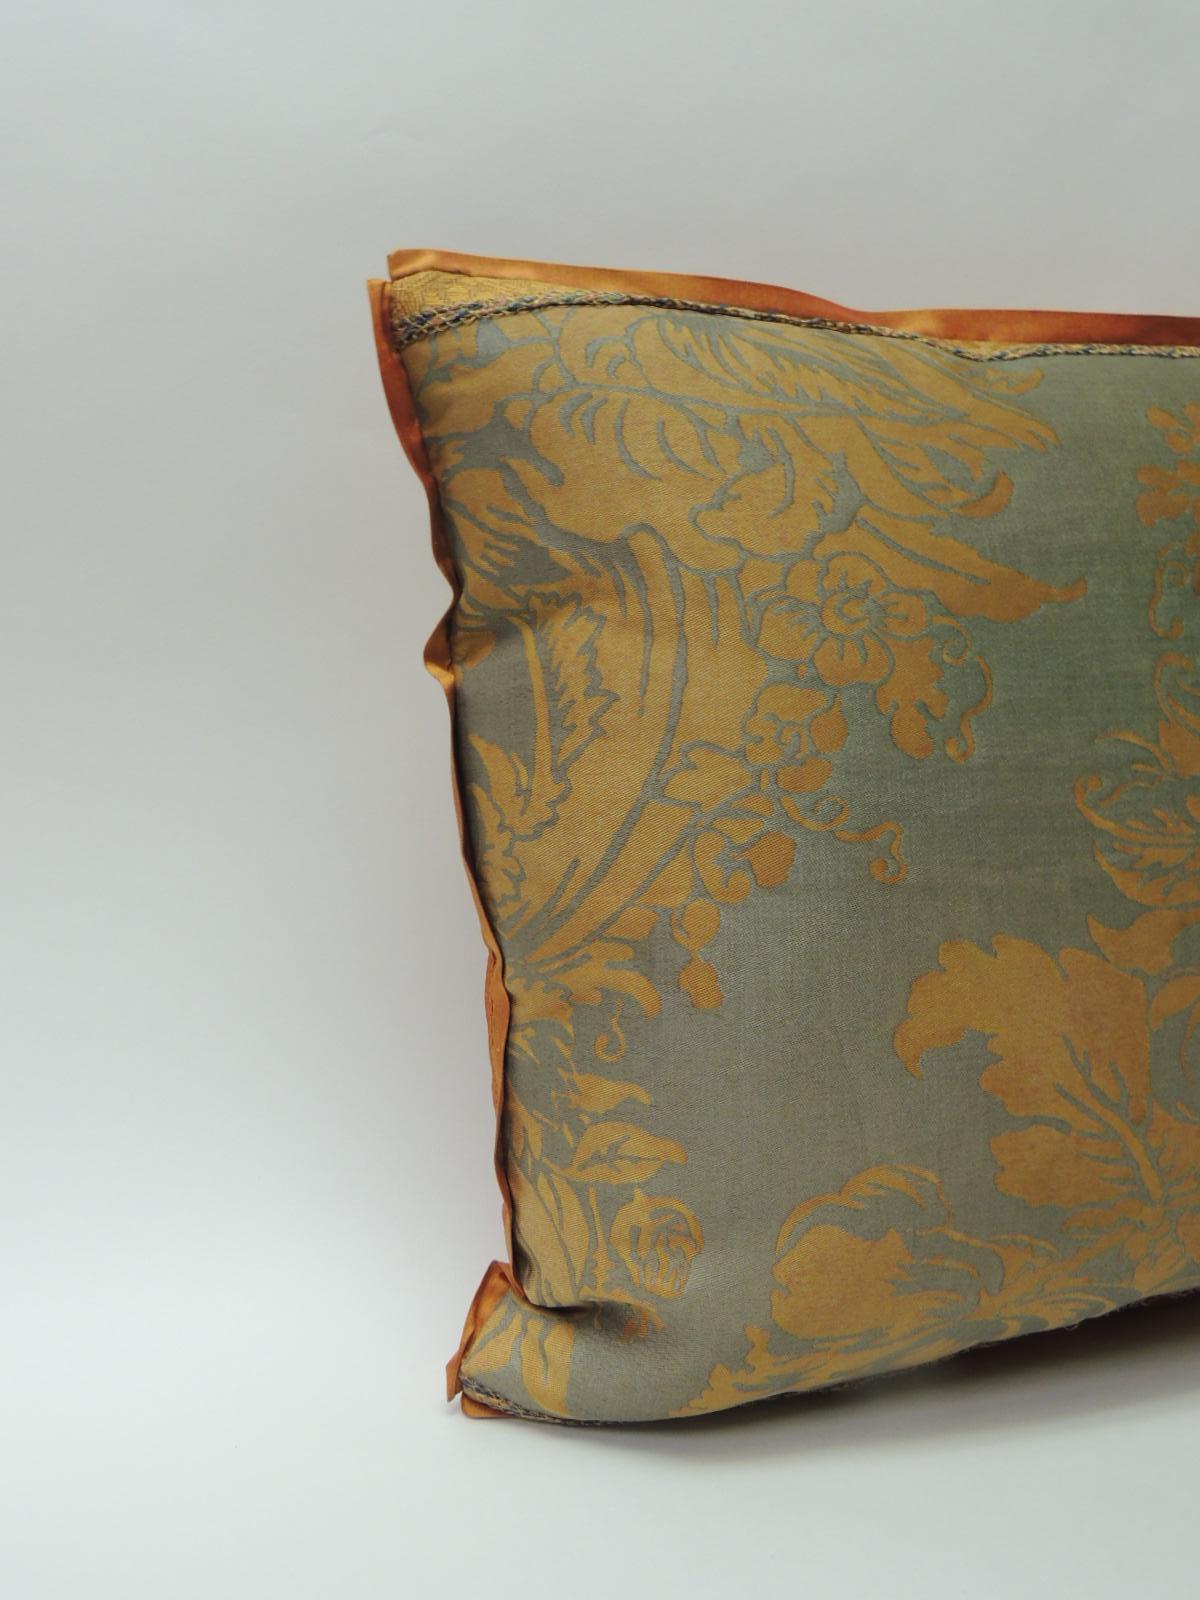 Fortuny accent pillow handcrafted in the Medici pattern in curry and silvery gold. Accentuated with gold silk trim on top and bottom. Burnt orange silk backing. Embellish with small silk woven trim. ATG custom flat trim all around.
Throw vintage